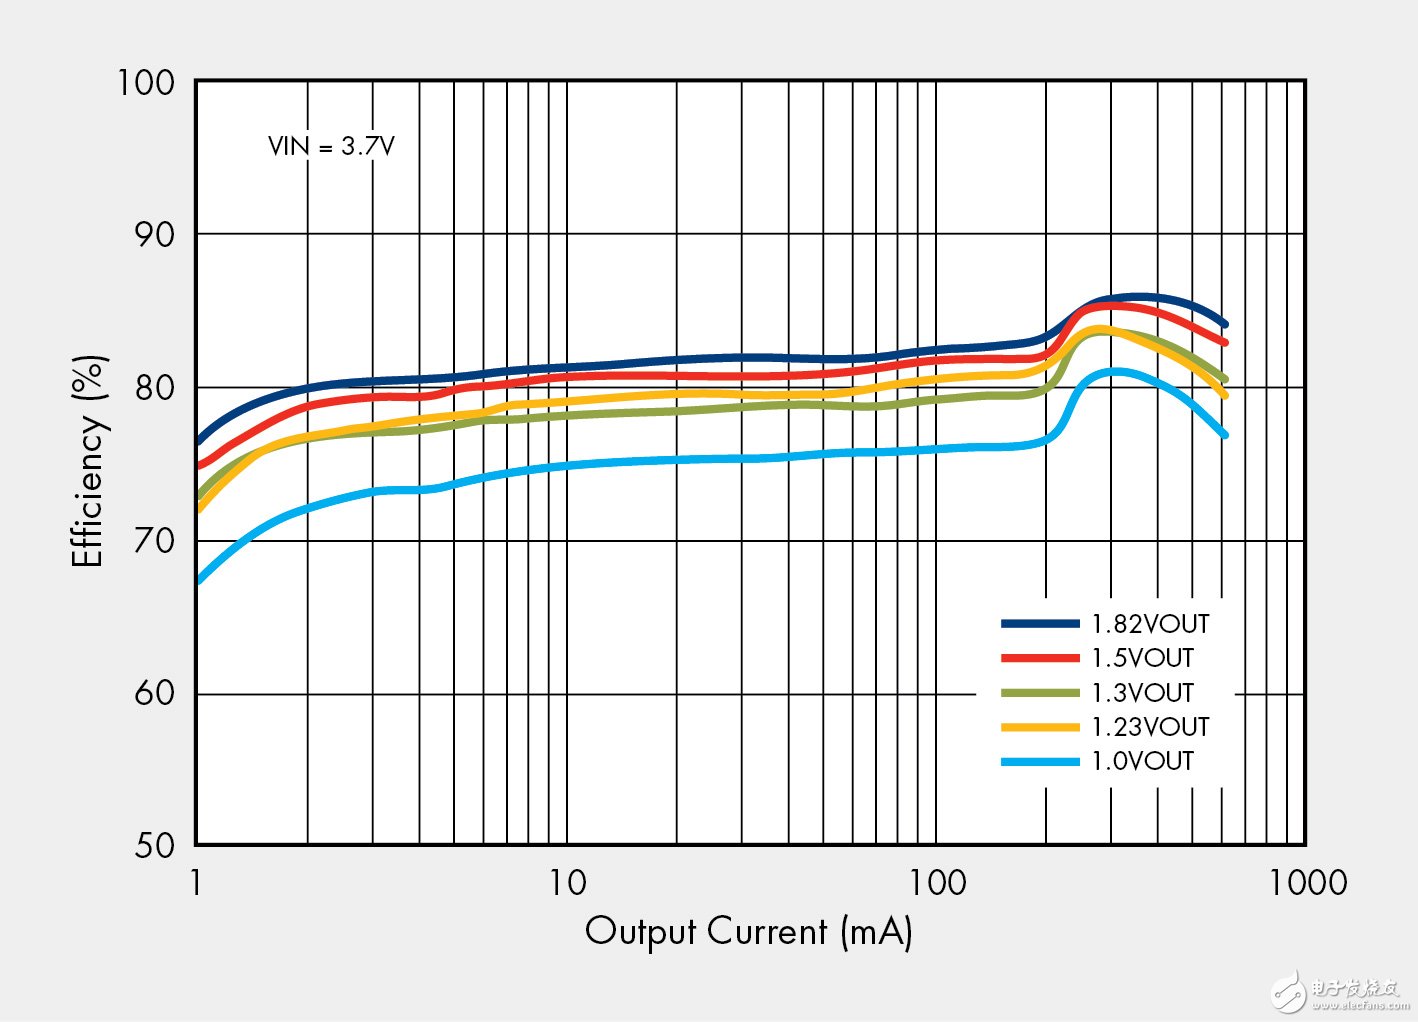 Figure 2. Efficiency curve of FAN4603 DC / DC converter with a load of 1mA to 600mA at 3.7V input and different output voltages.